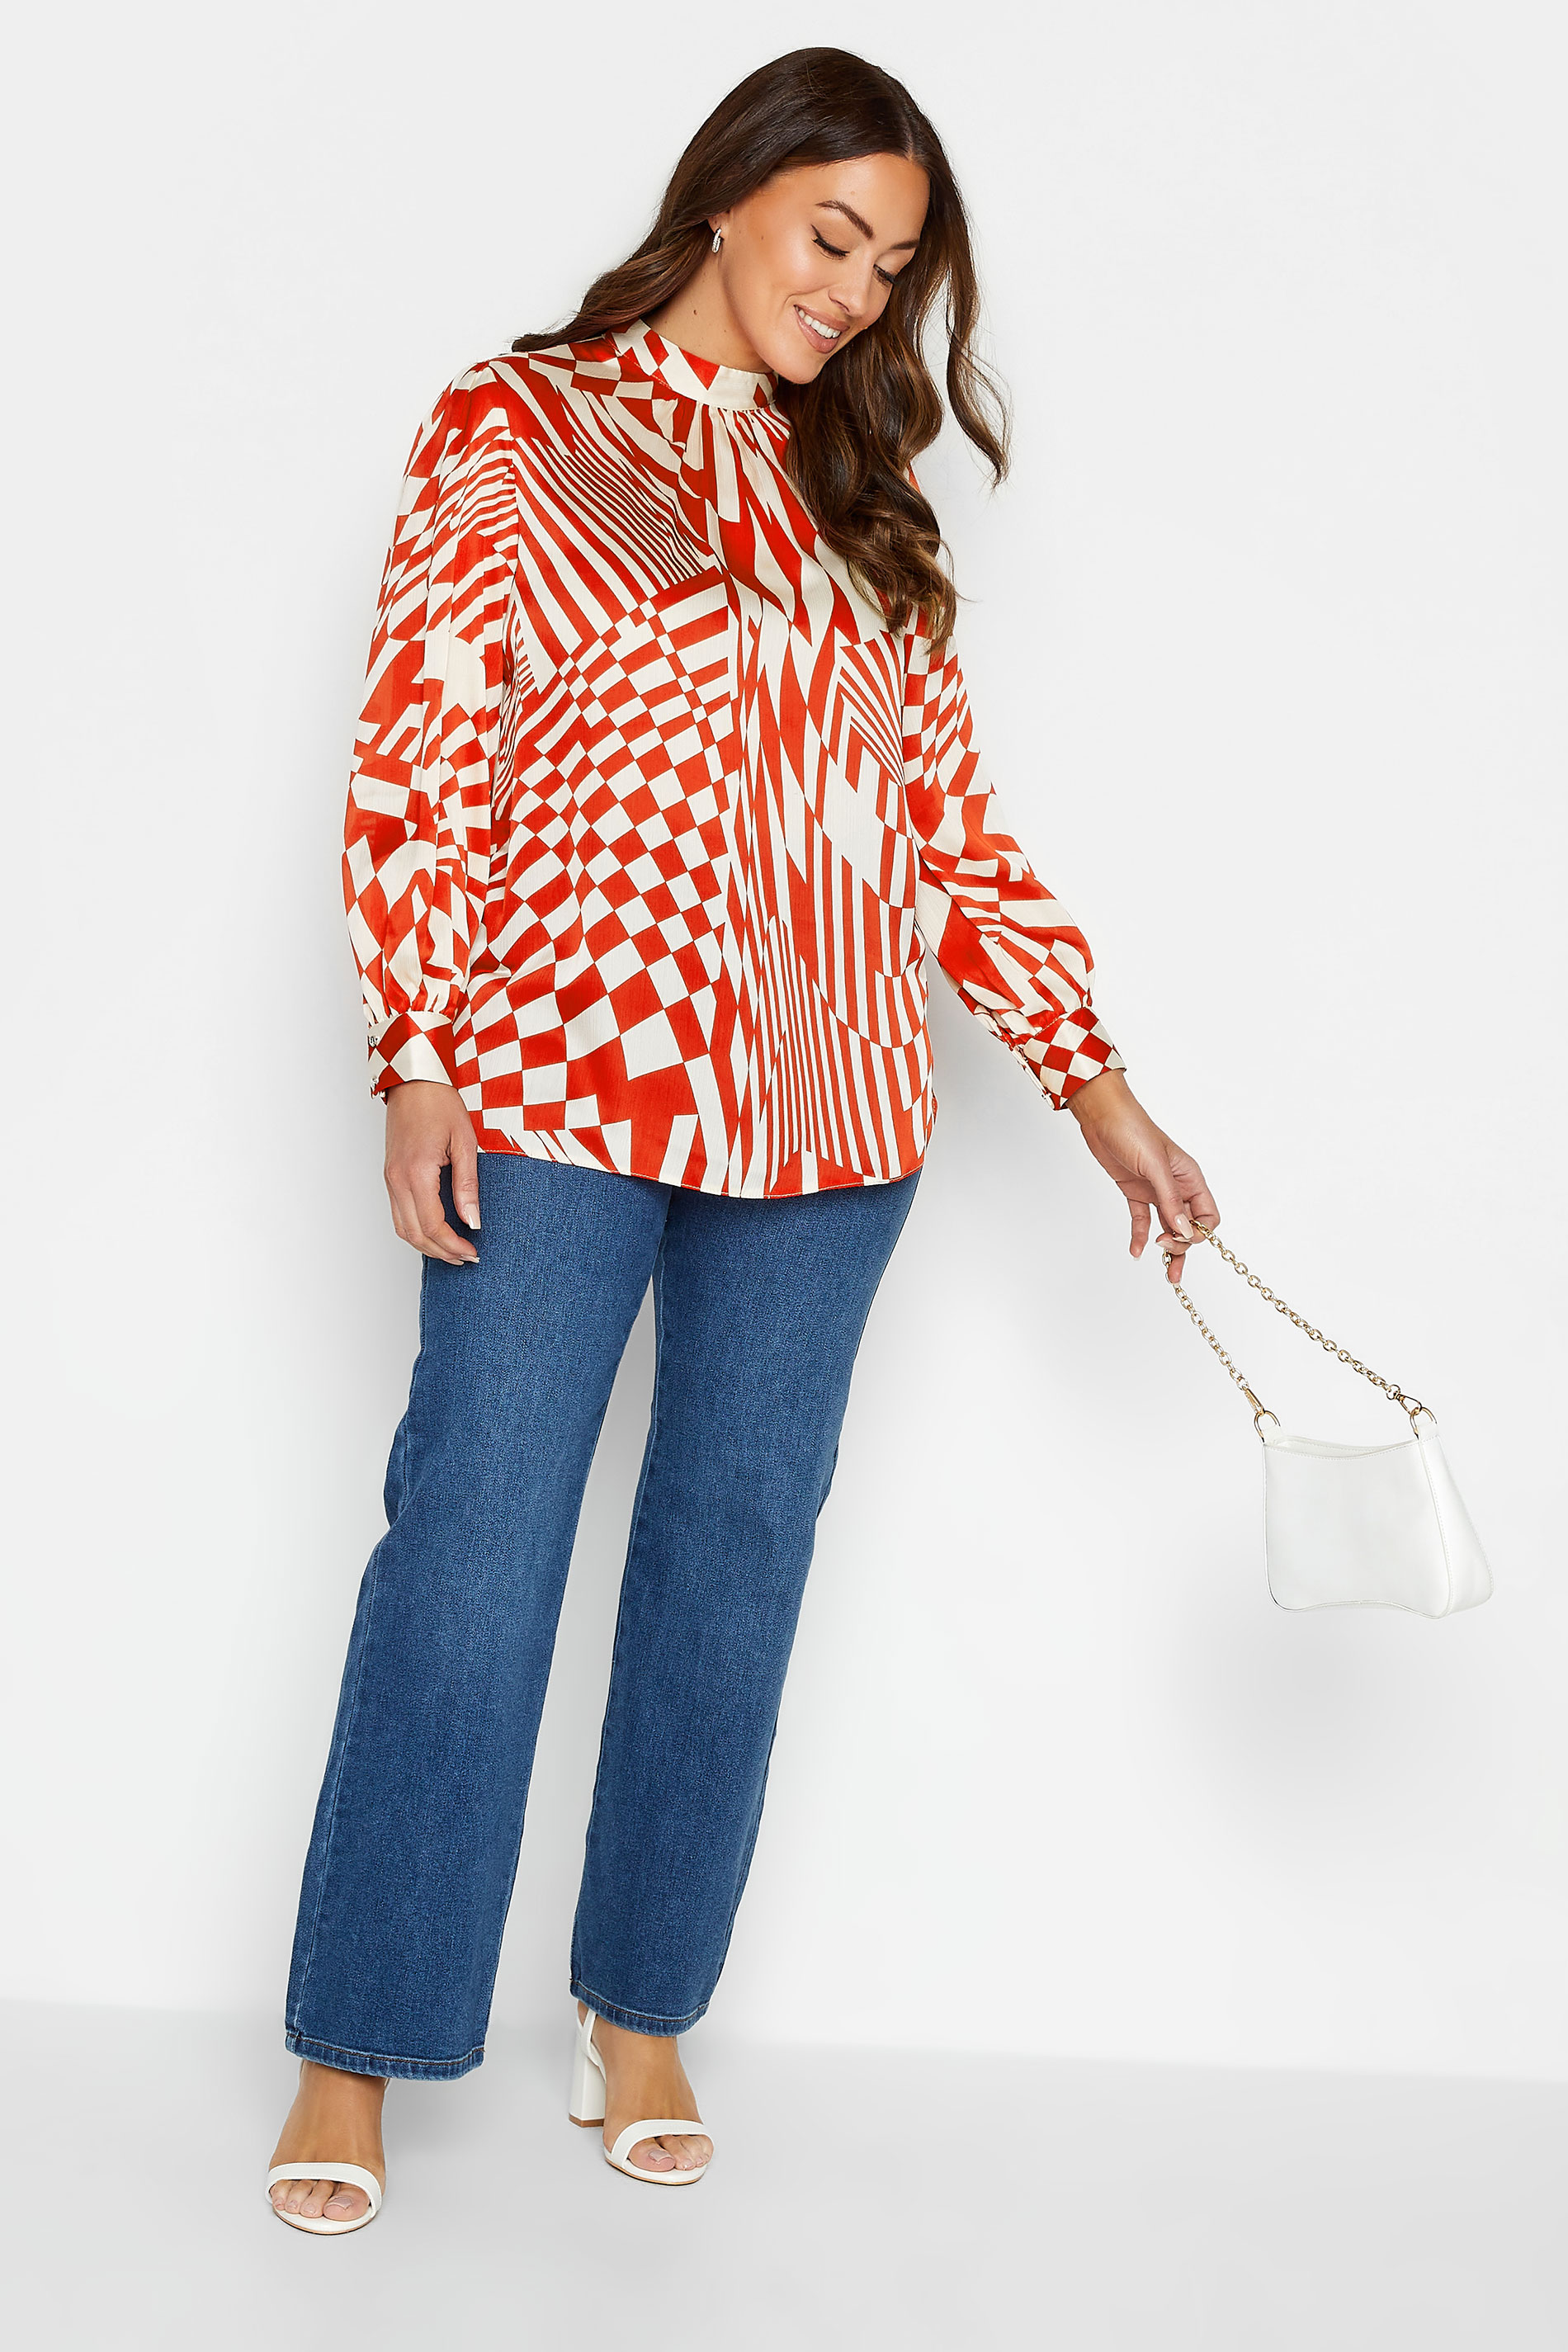 M&Co Red & White Abstract Print High Neck Satin Blouse | M&Co 3